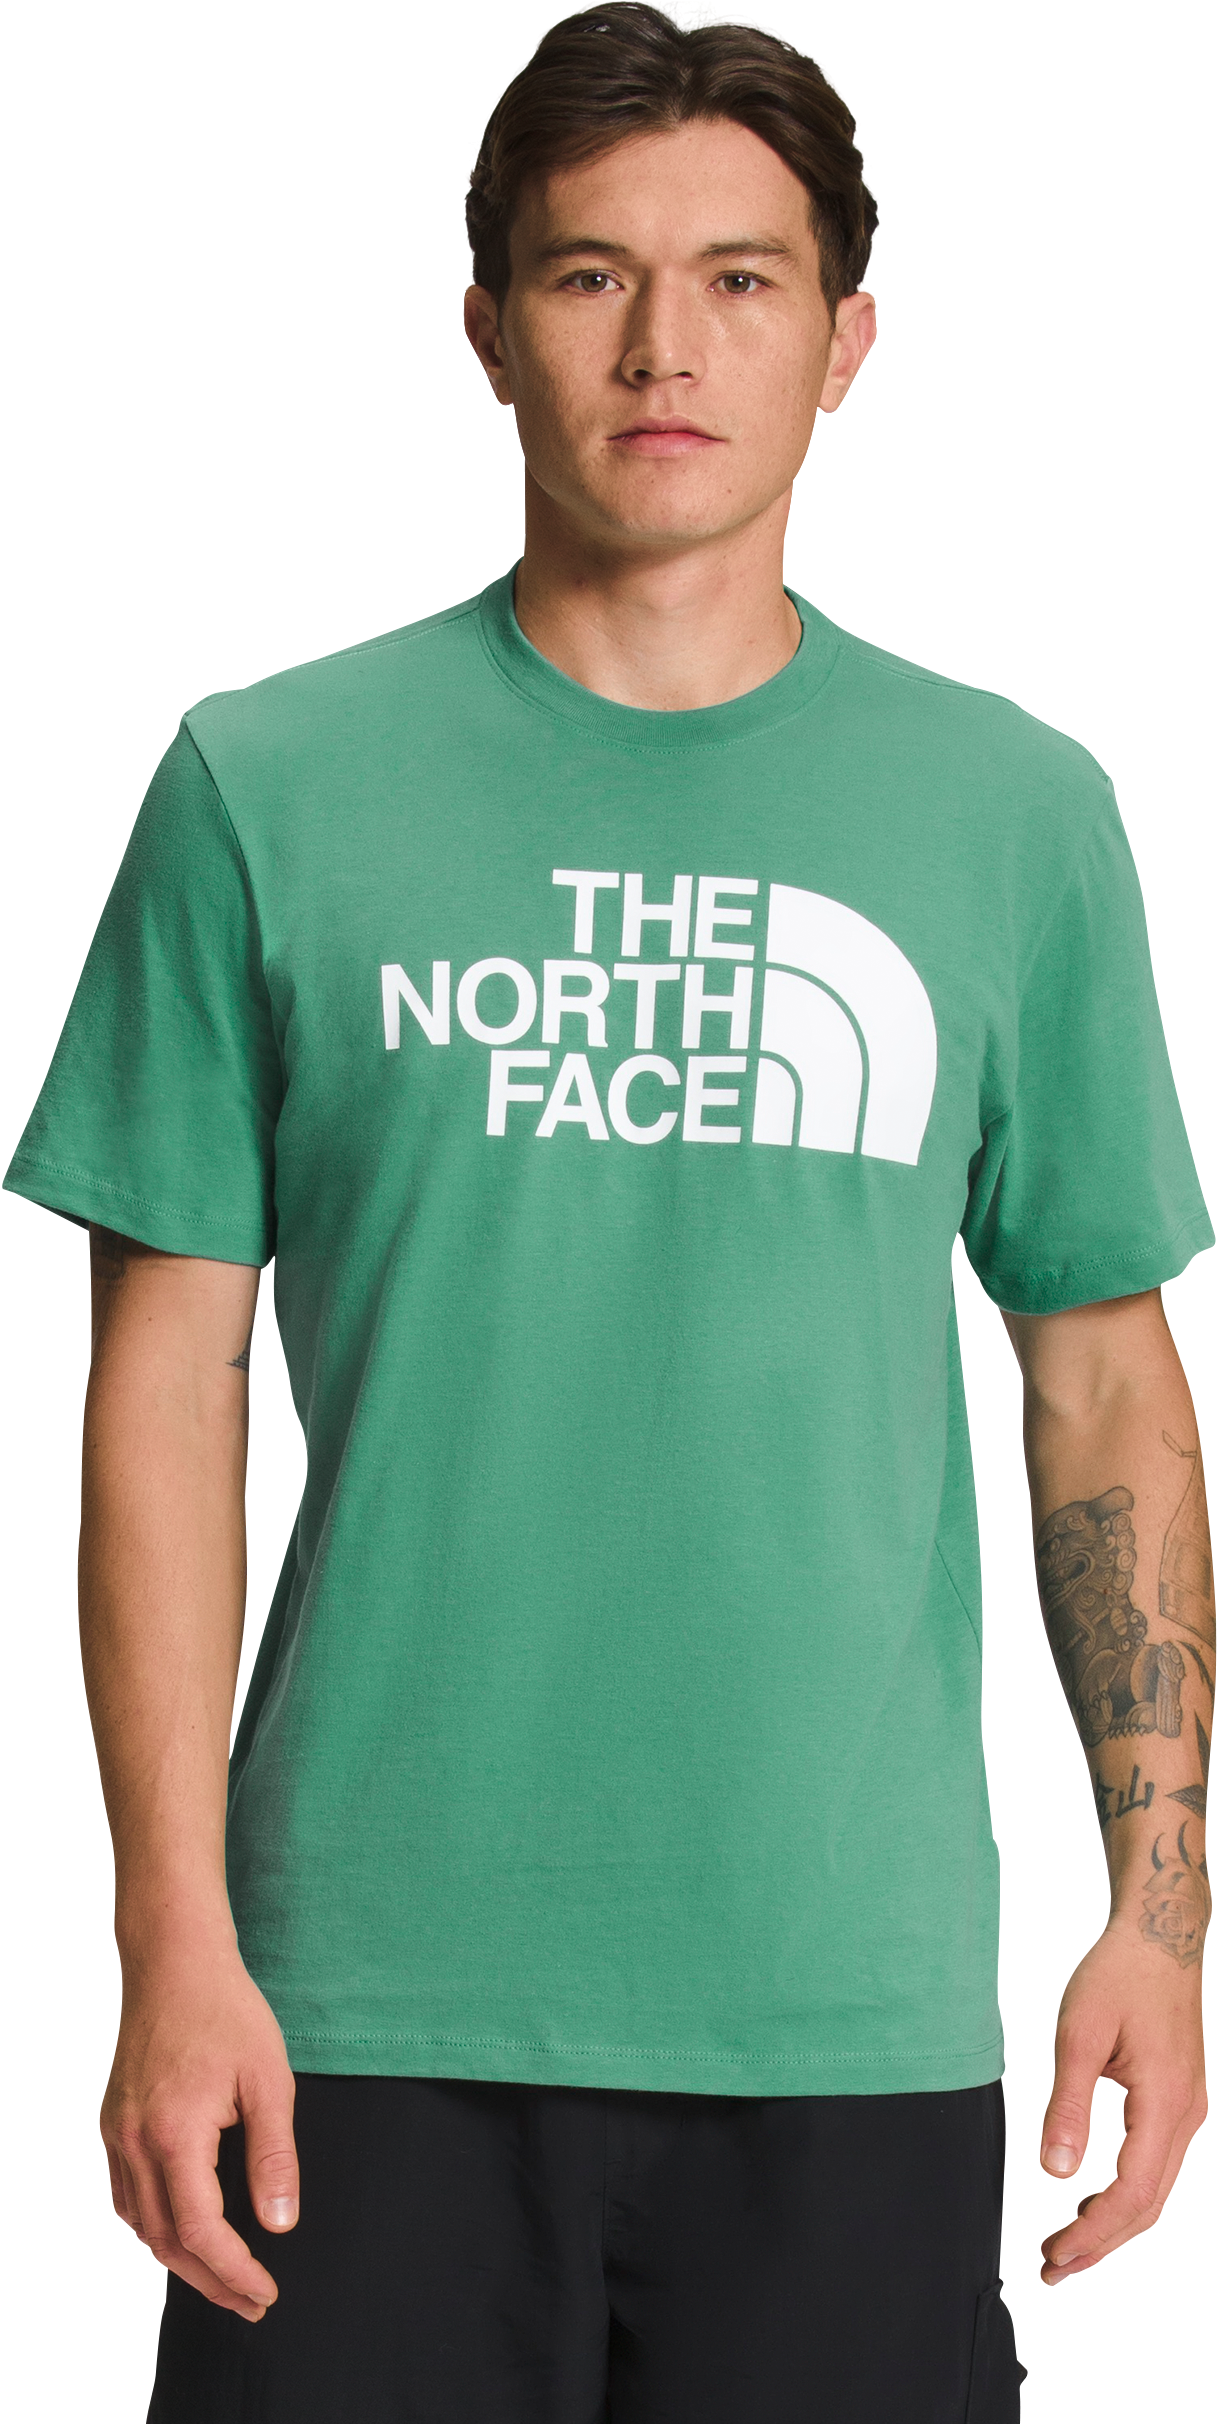 The North Face Half Dome Short-Sleeve T-Shirt for Men - Deep Grass Green - S